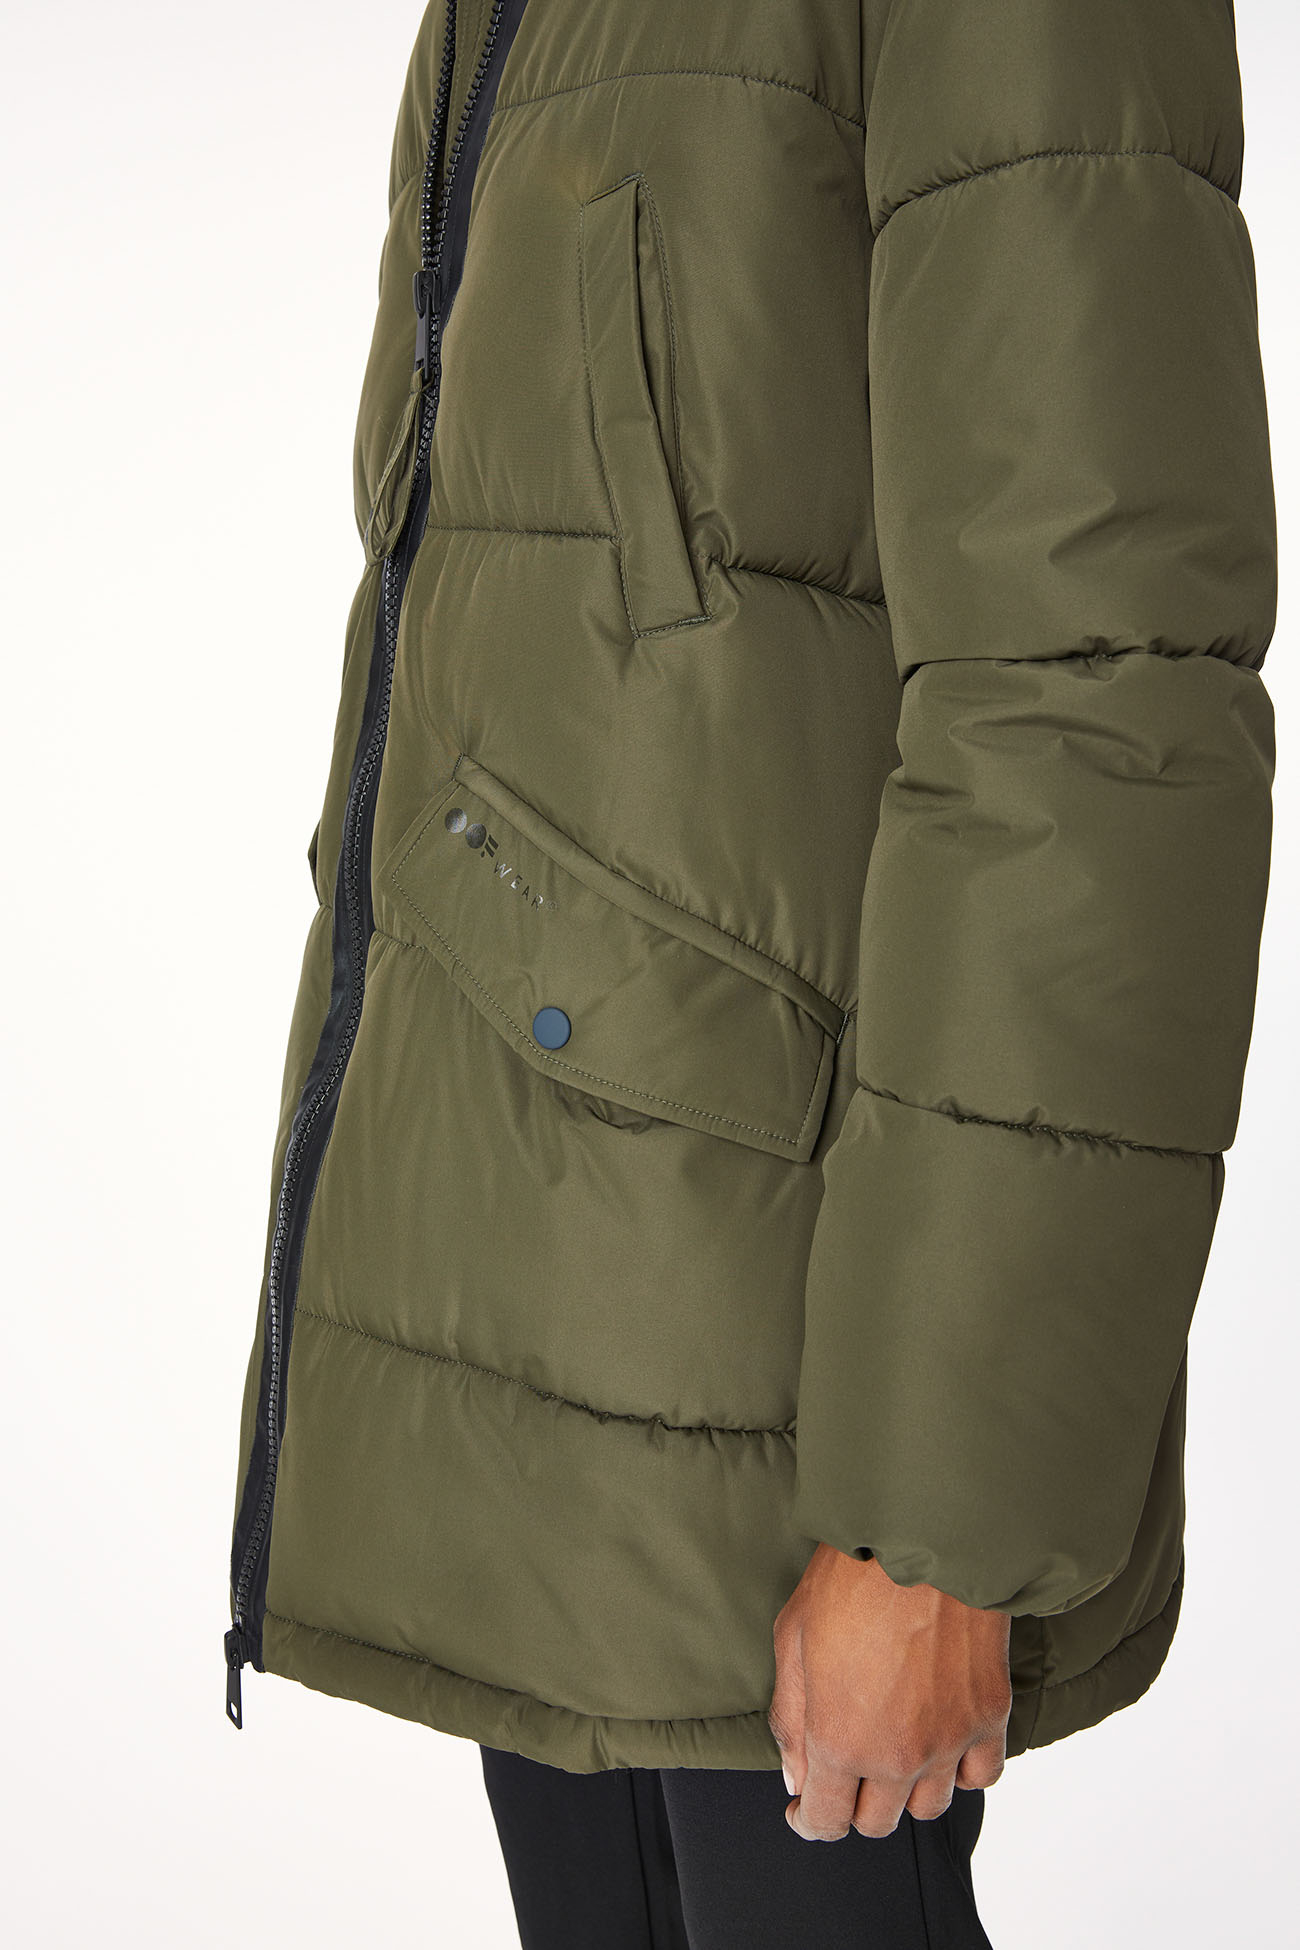 JACKET 9098 MADE IN WATER RESISTANT NYLON - MOSS GREEN - OOF WEAR